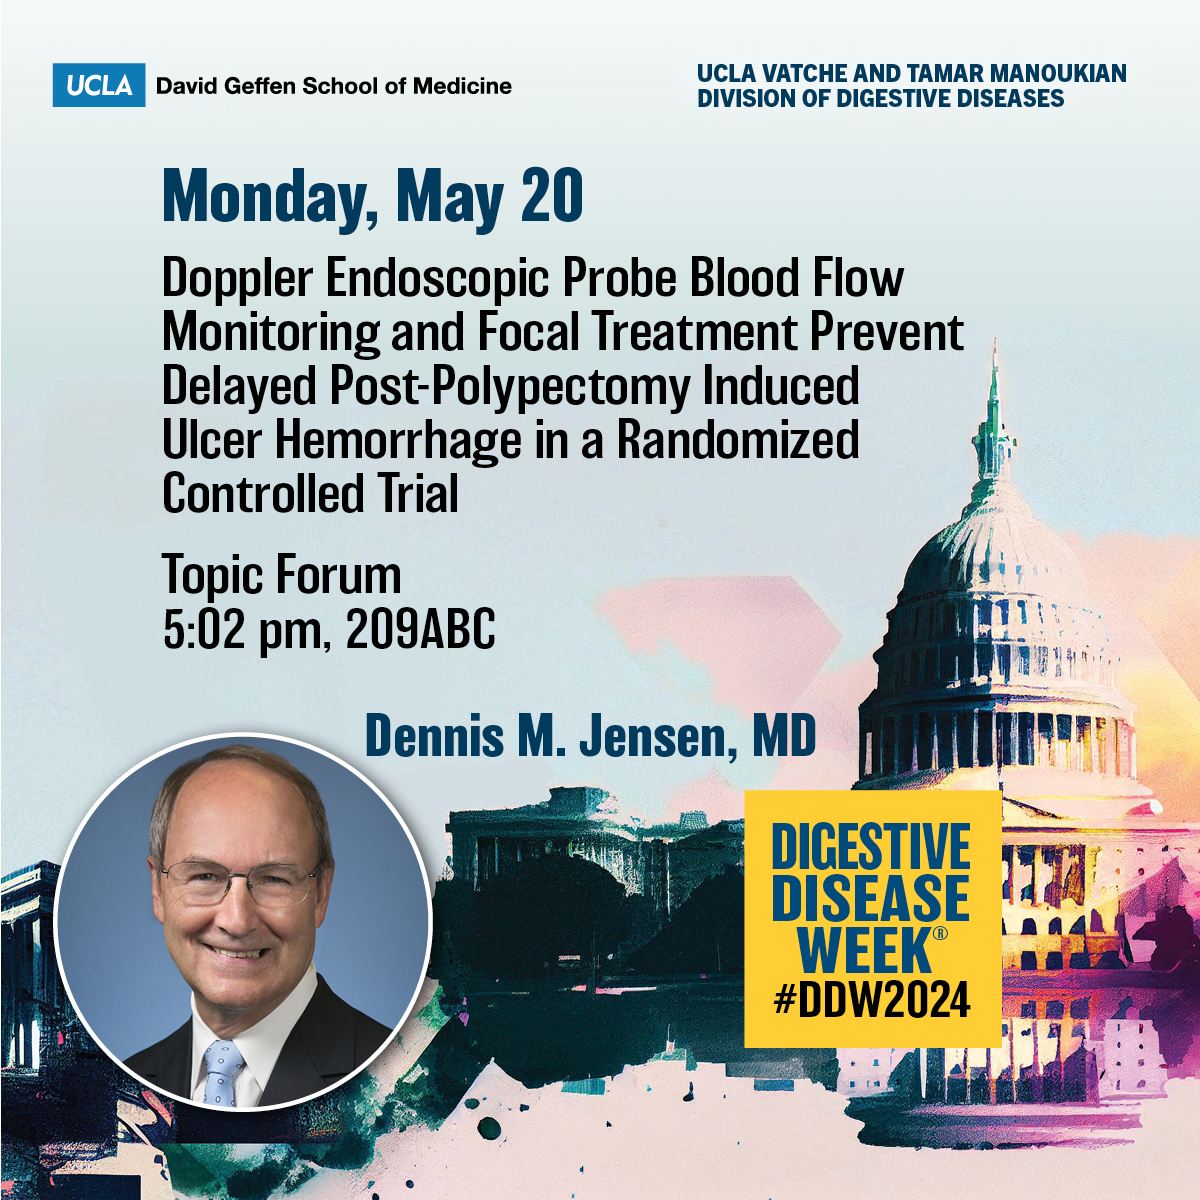 🌠 Join Dennis M. Jensen, MD, #UCLAGI, at #DD2024 Topic Forum, 5:02pm, 209ABC, Monday, May 20!

Doppler Endoscopic Probe Blood Flow Monitoring and Focal Treatment Prevent Delayed Post-Polypectomy Induced Ulcer Hemorrhage in a Randomized Controlled Trial